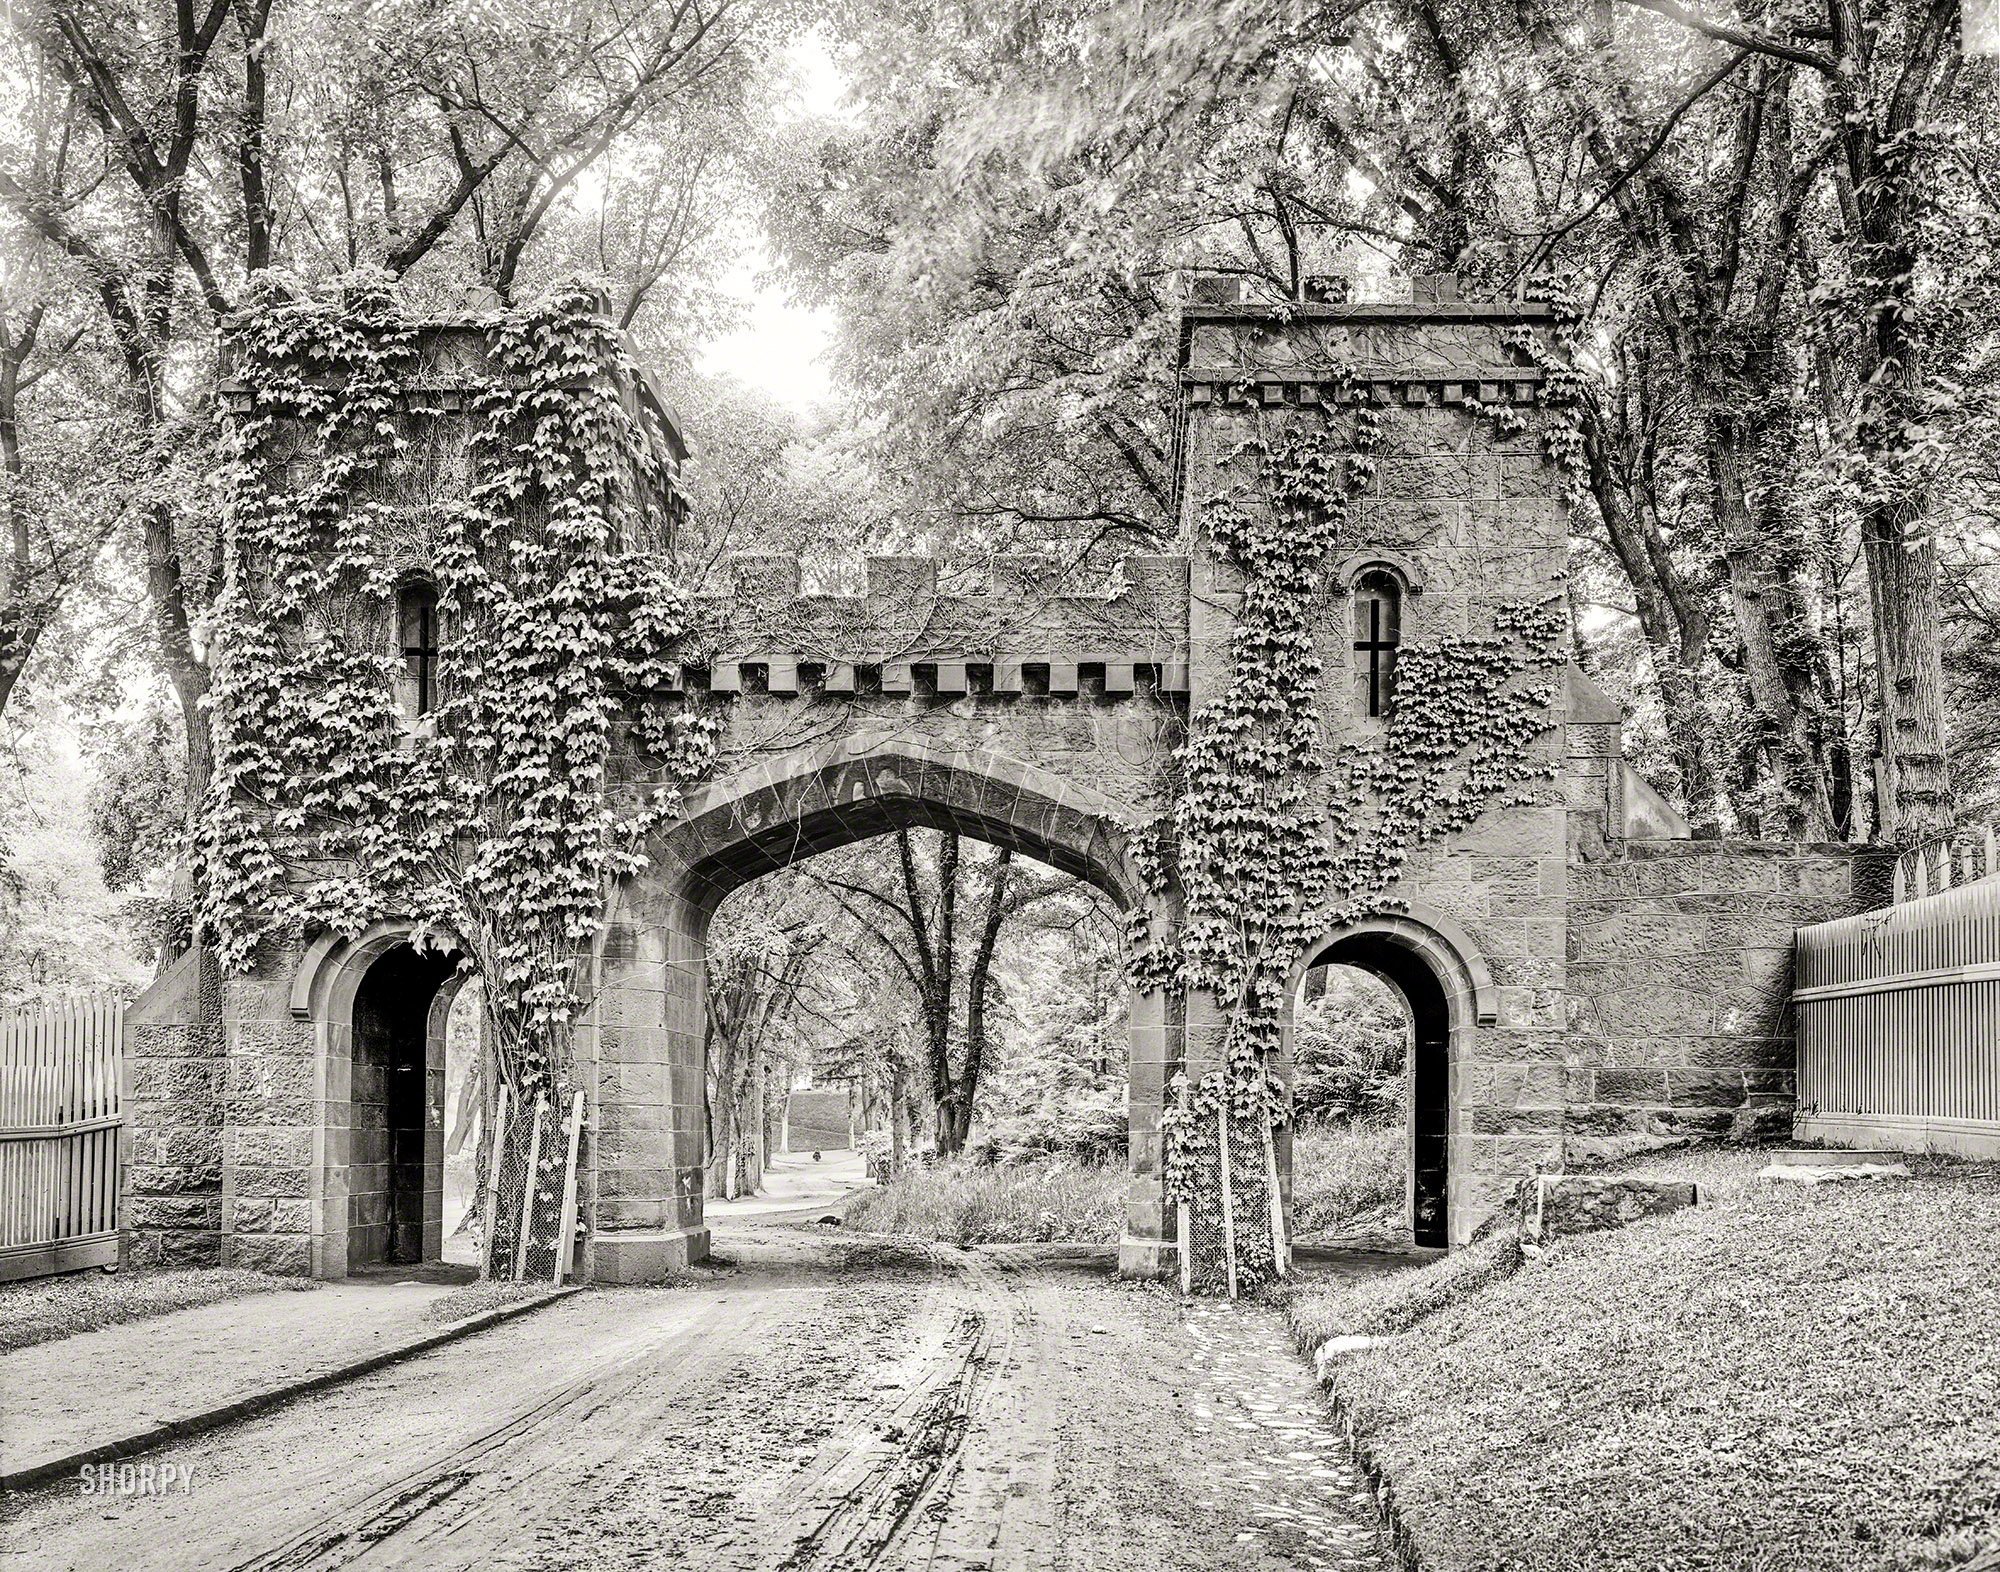 Circa 1905. "Main entrance to cemetery, Springfield, Mass." 8x10 inch dry plate glass negative, Detroit Photographic Company. View full size.